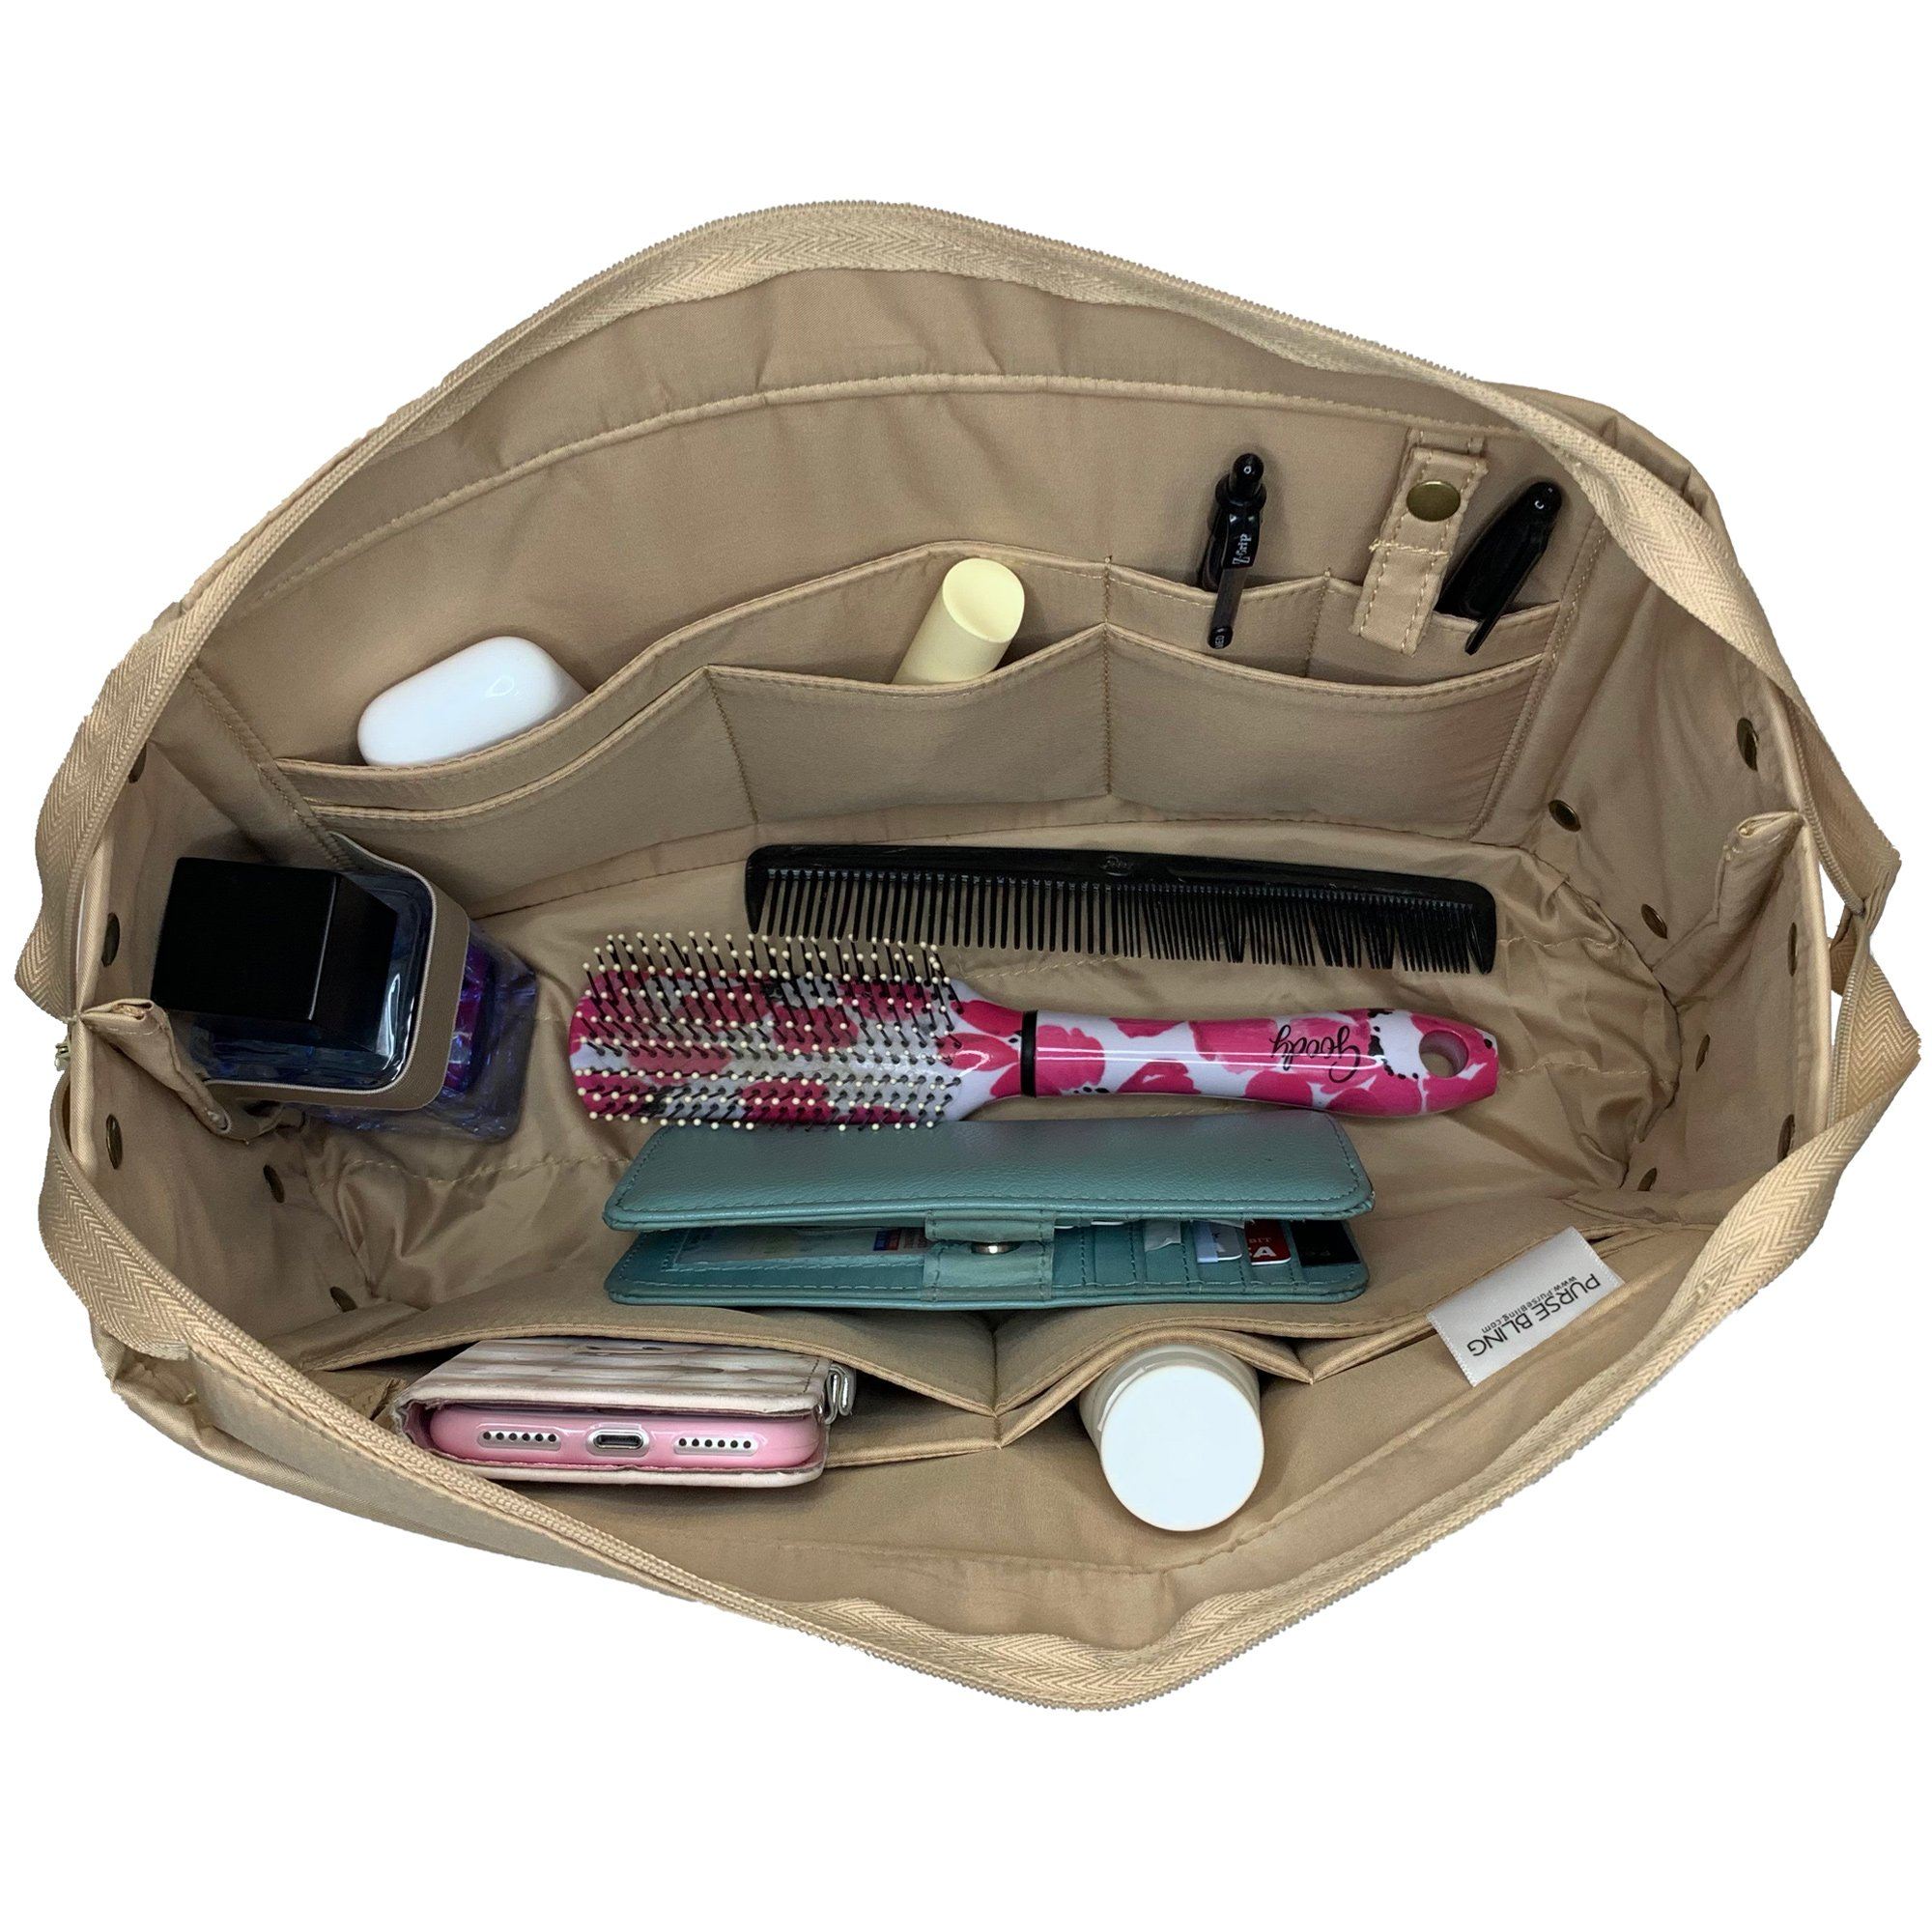 Purse Bling Purse To Go Style Organizer Insert with Zipper - Large